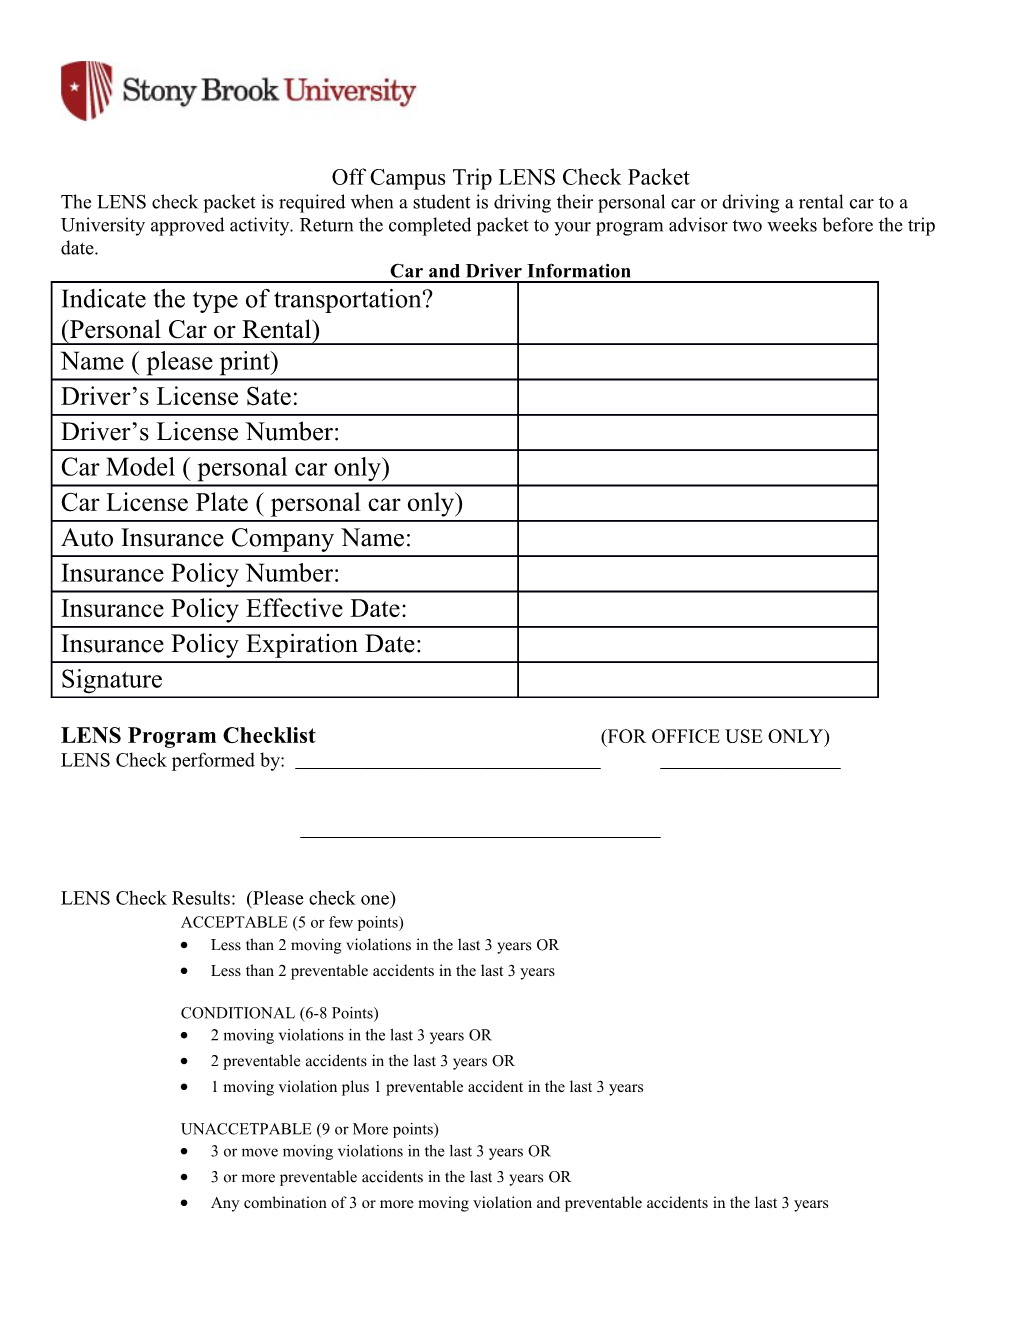 Off Campus Trip LENS Check Packet